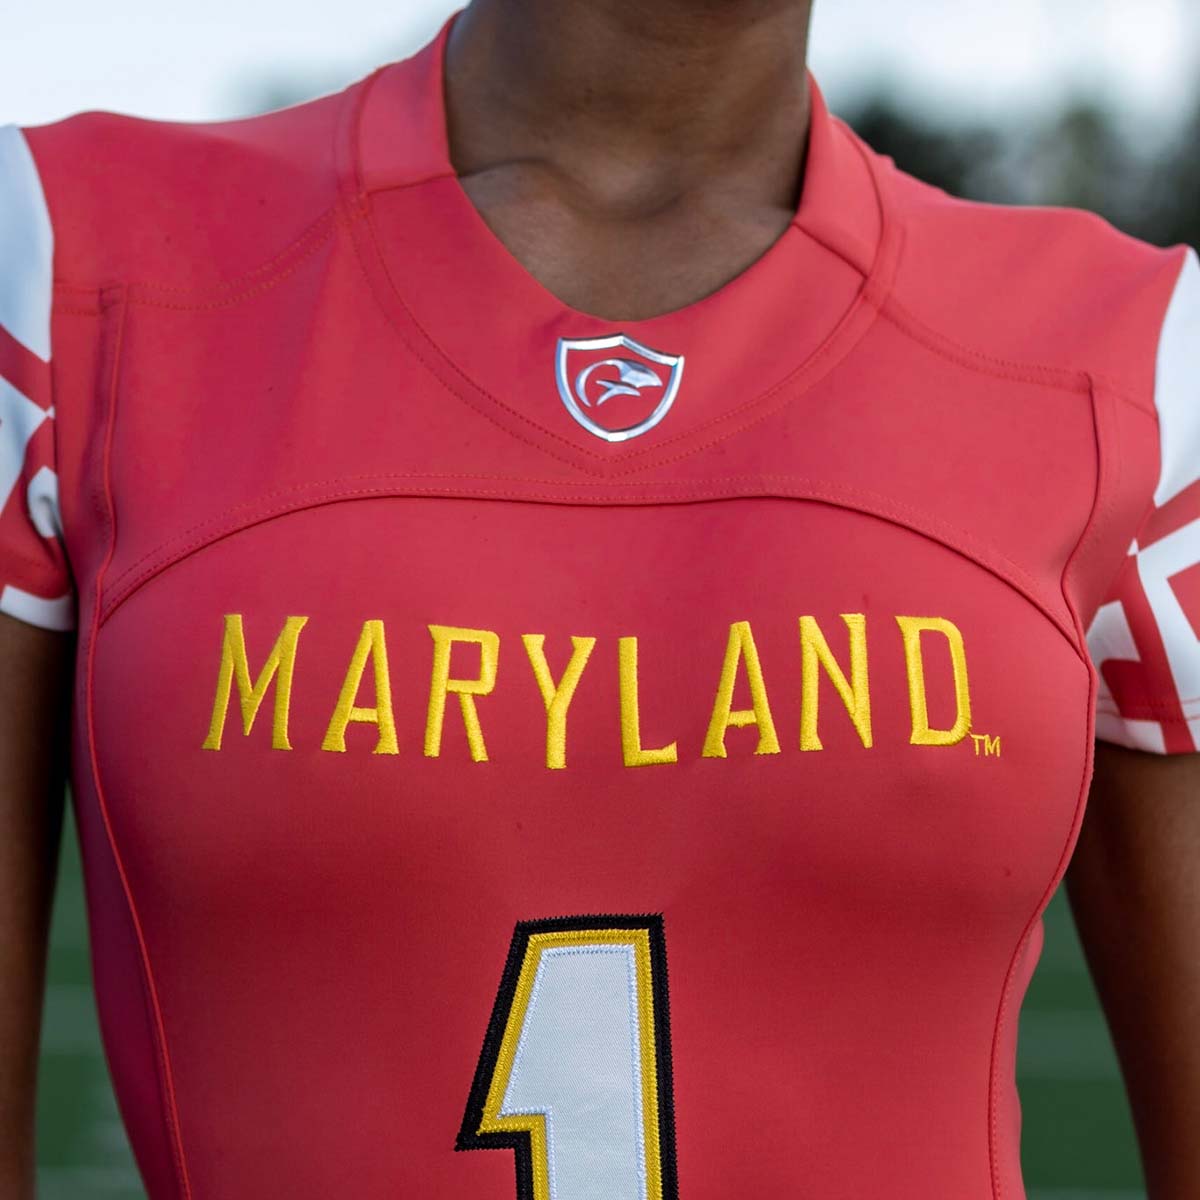 MARYLAND AUTHENTIC JERSEY DRESS-Large